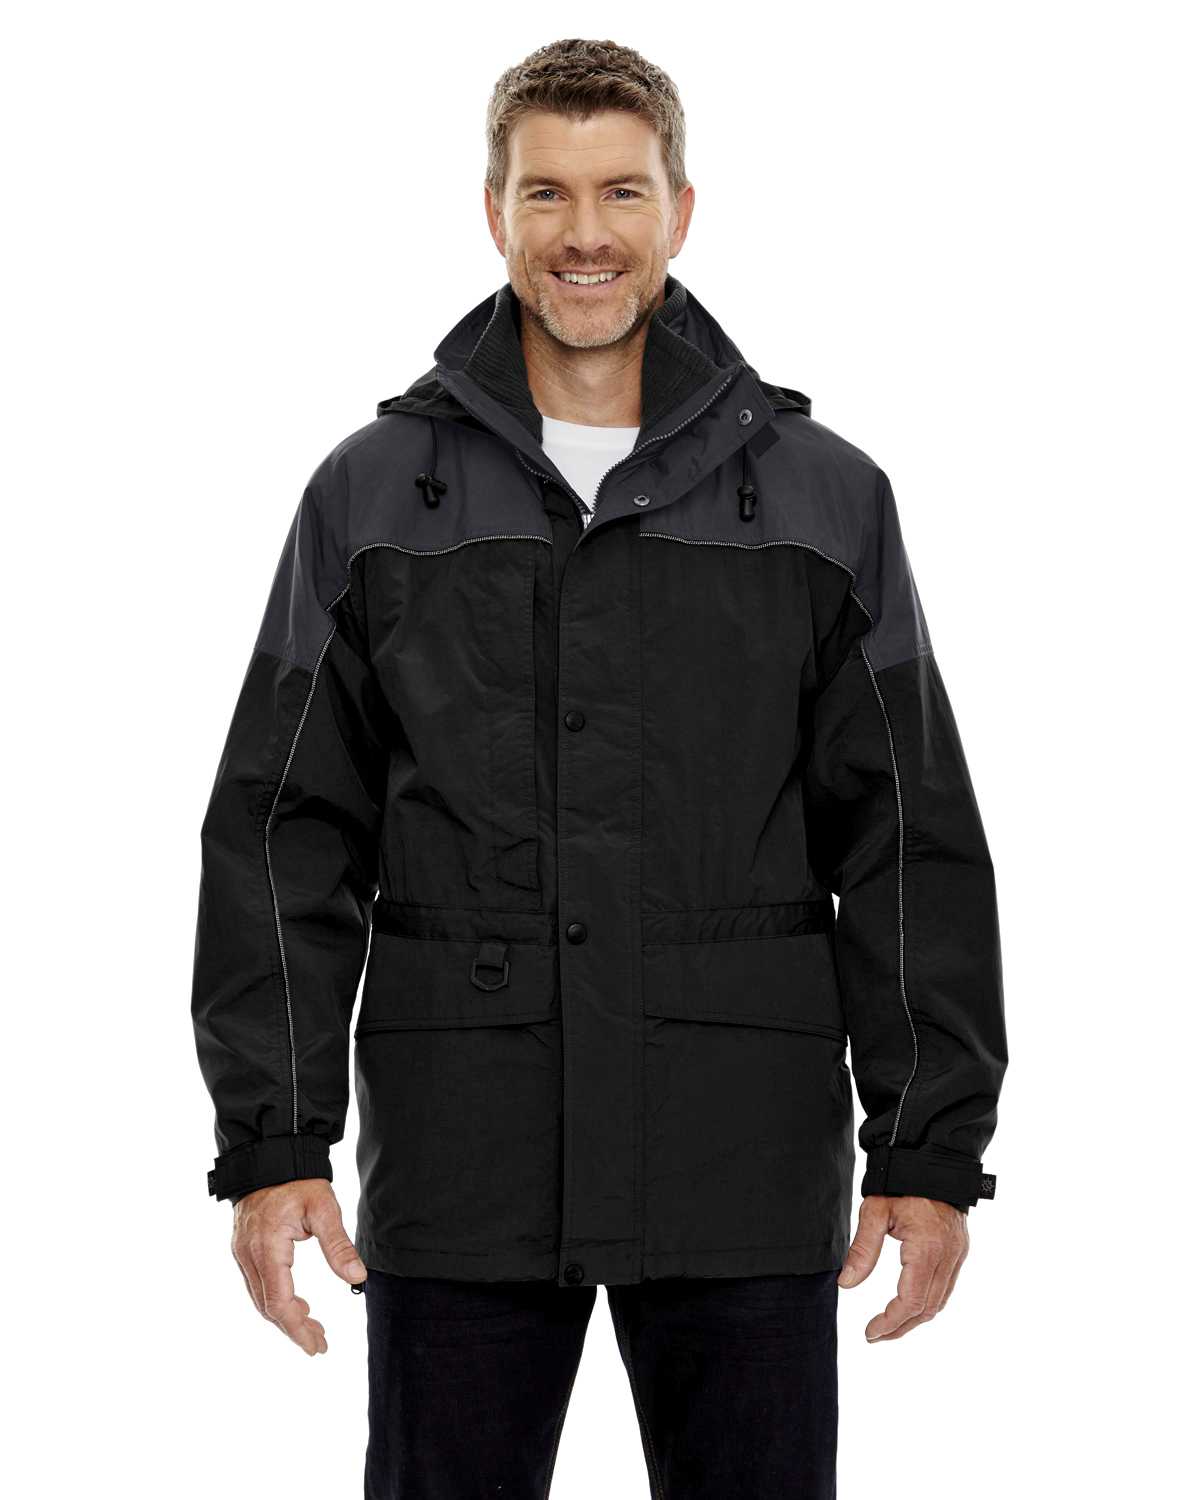 North End 88006 Adult 3-in-1 Two-Tone Parka | ApparelChoice.com